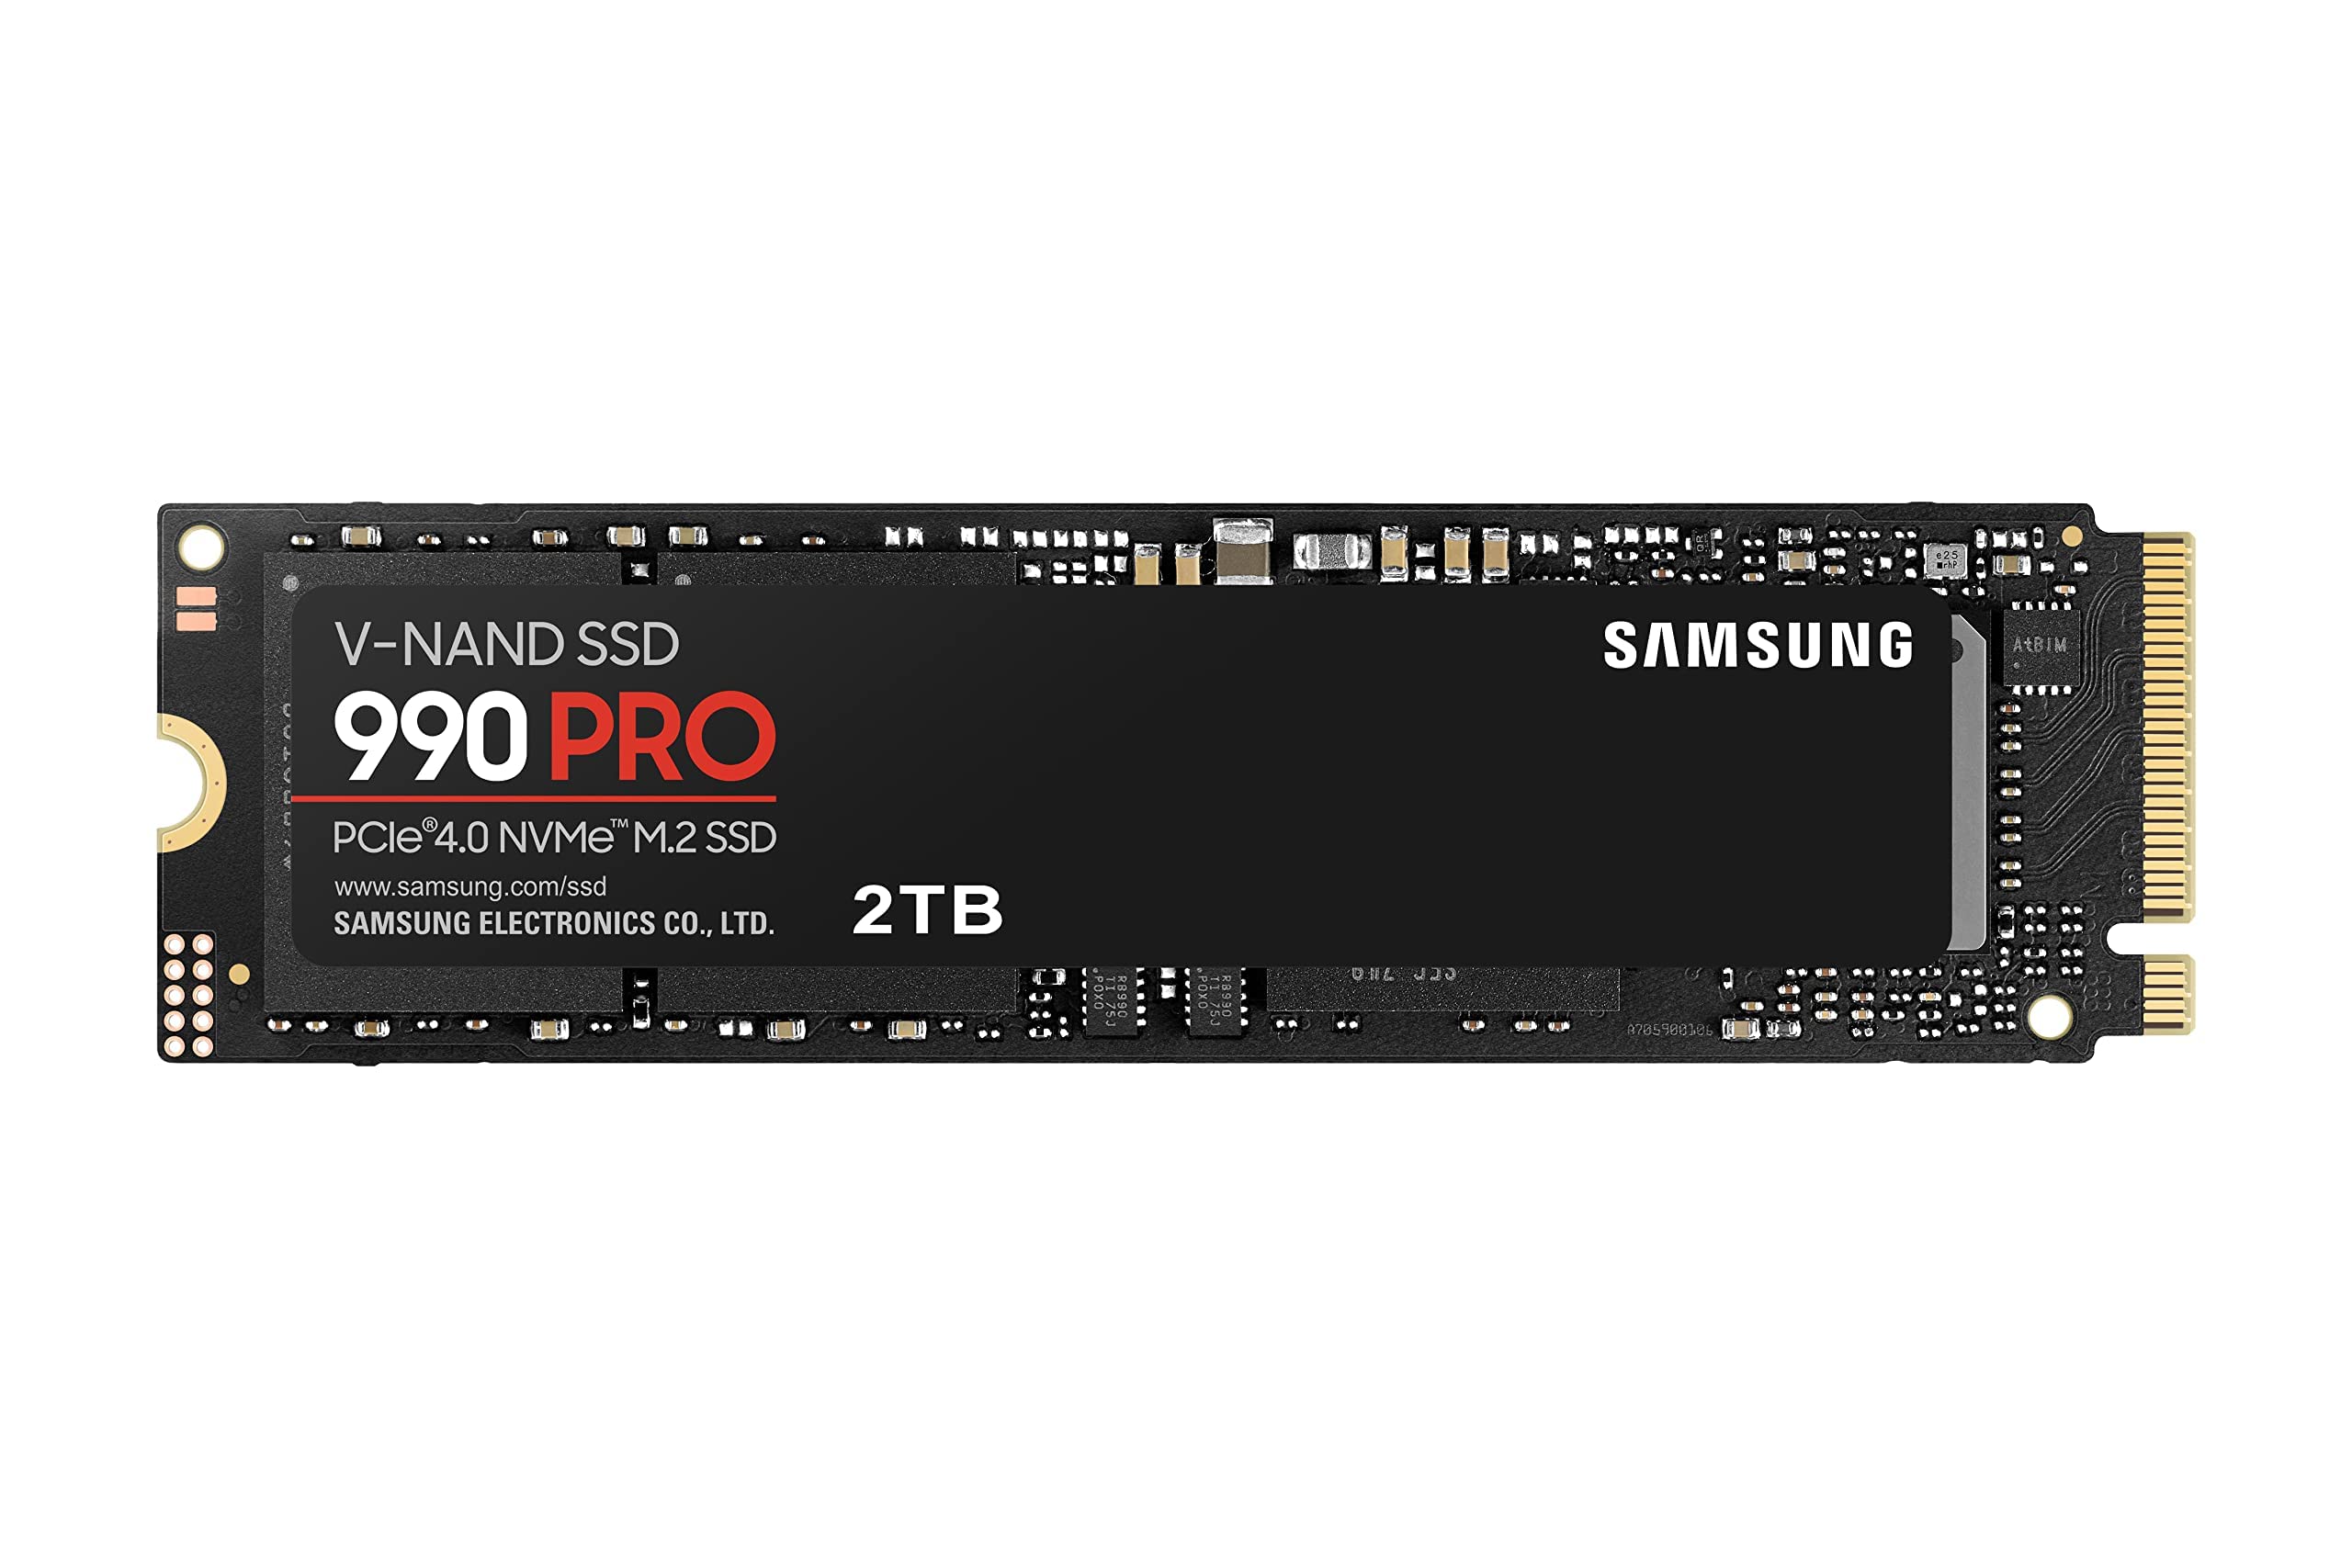 2TB Samsung 990 Pro PCIe 4.0 NVMe M.2 Solid State Drive SSD $150 + Free Shipping